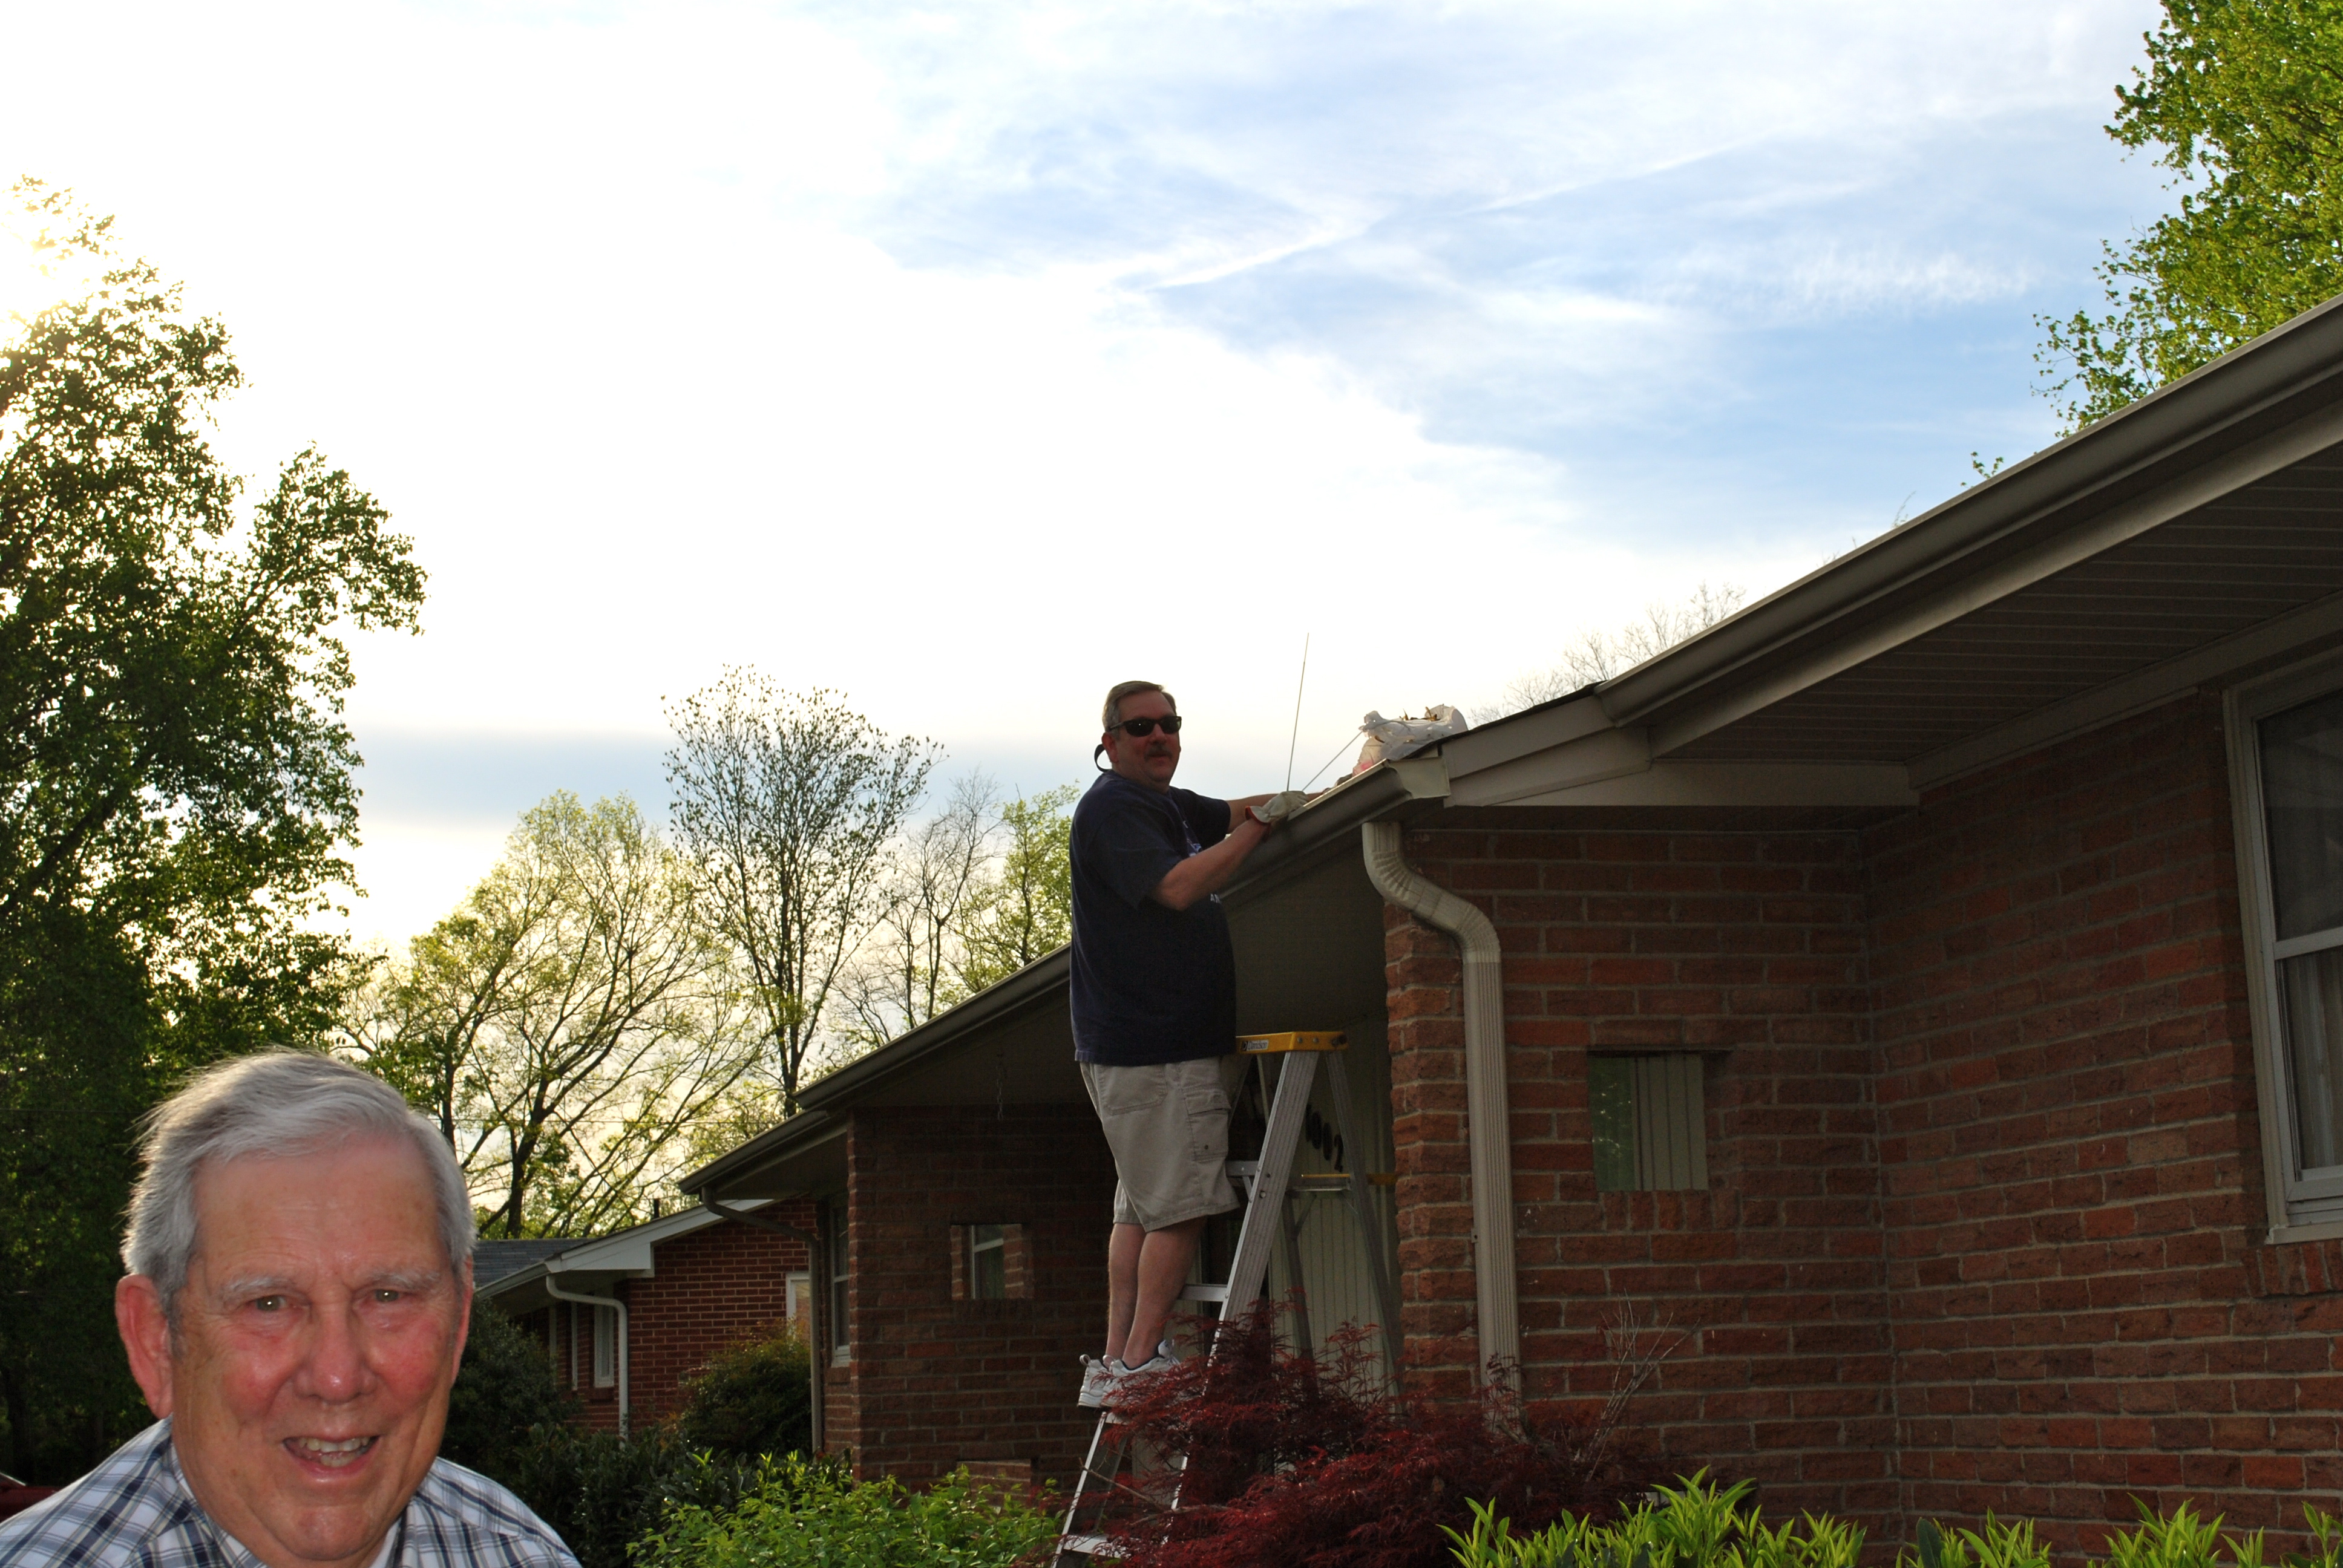 Alan was cleaning out the gutters for Granddaddy.